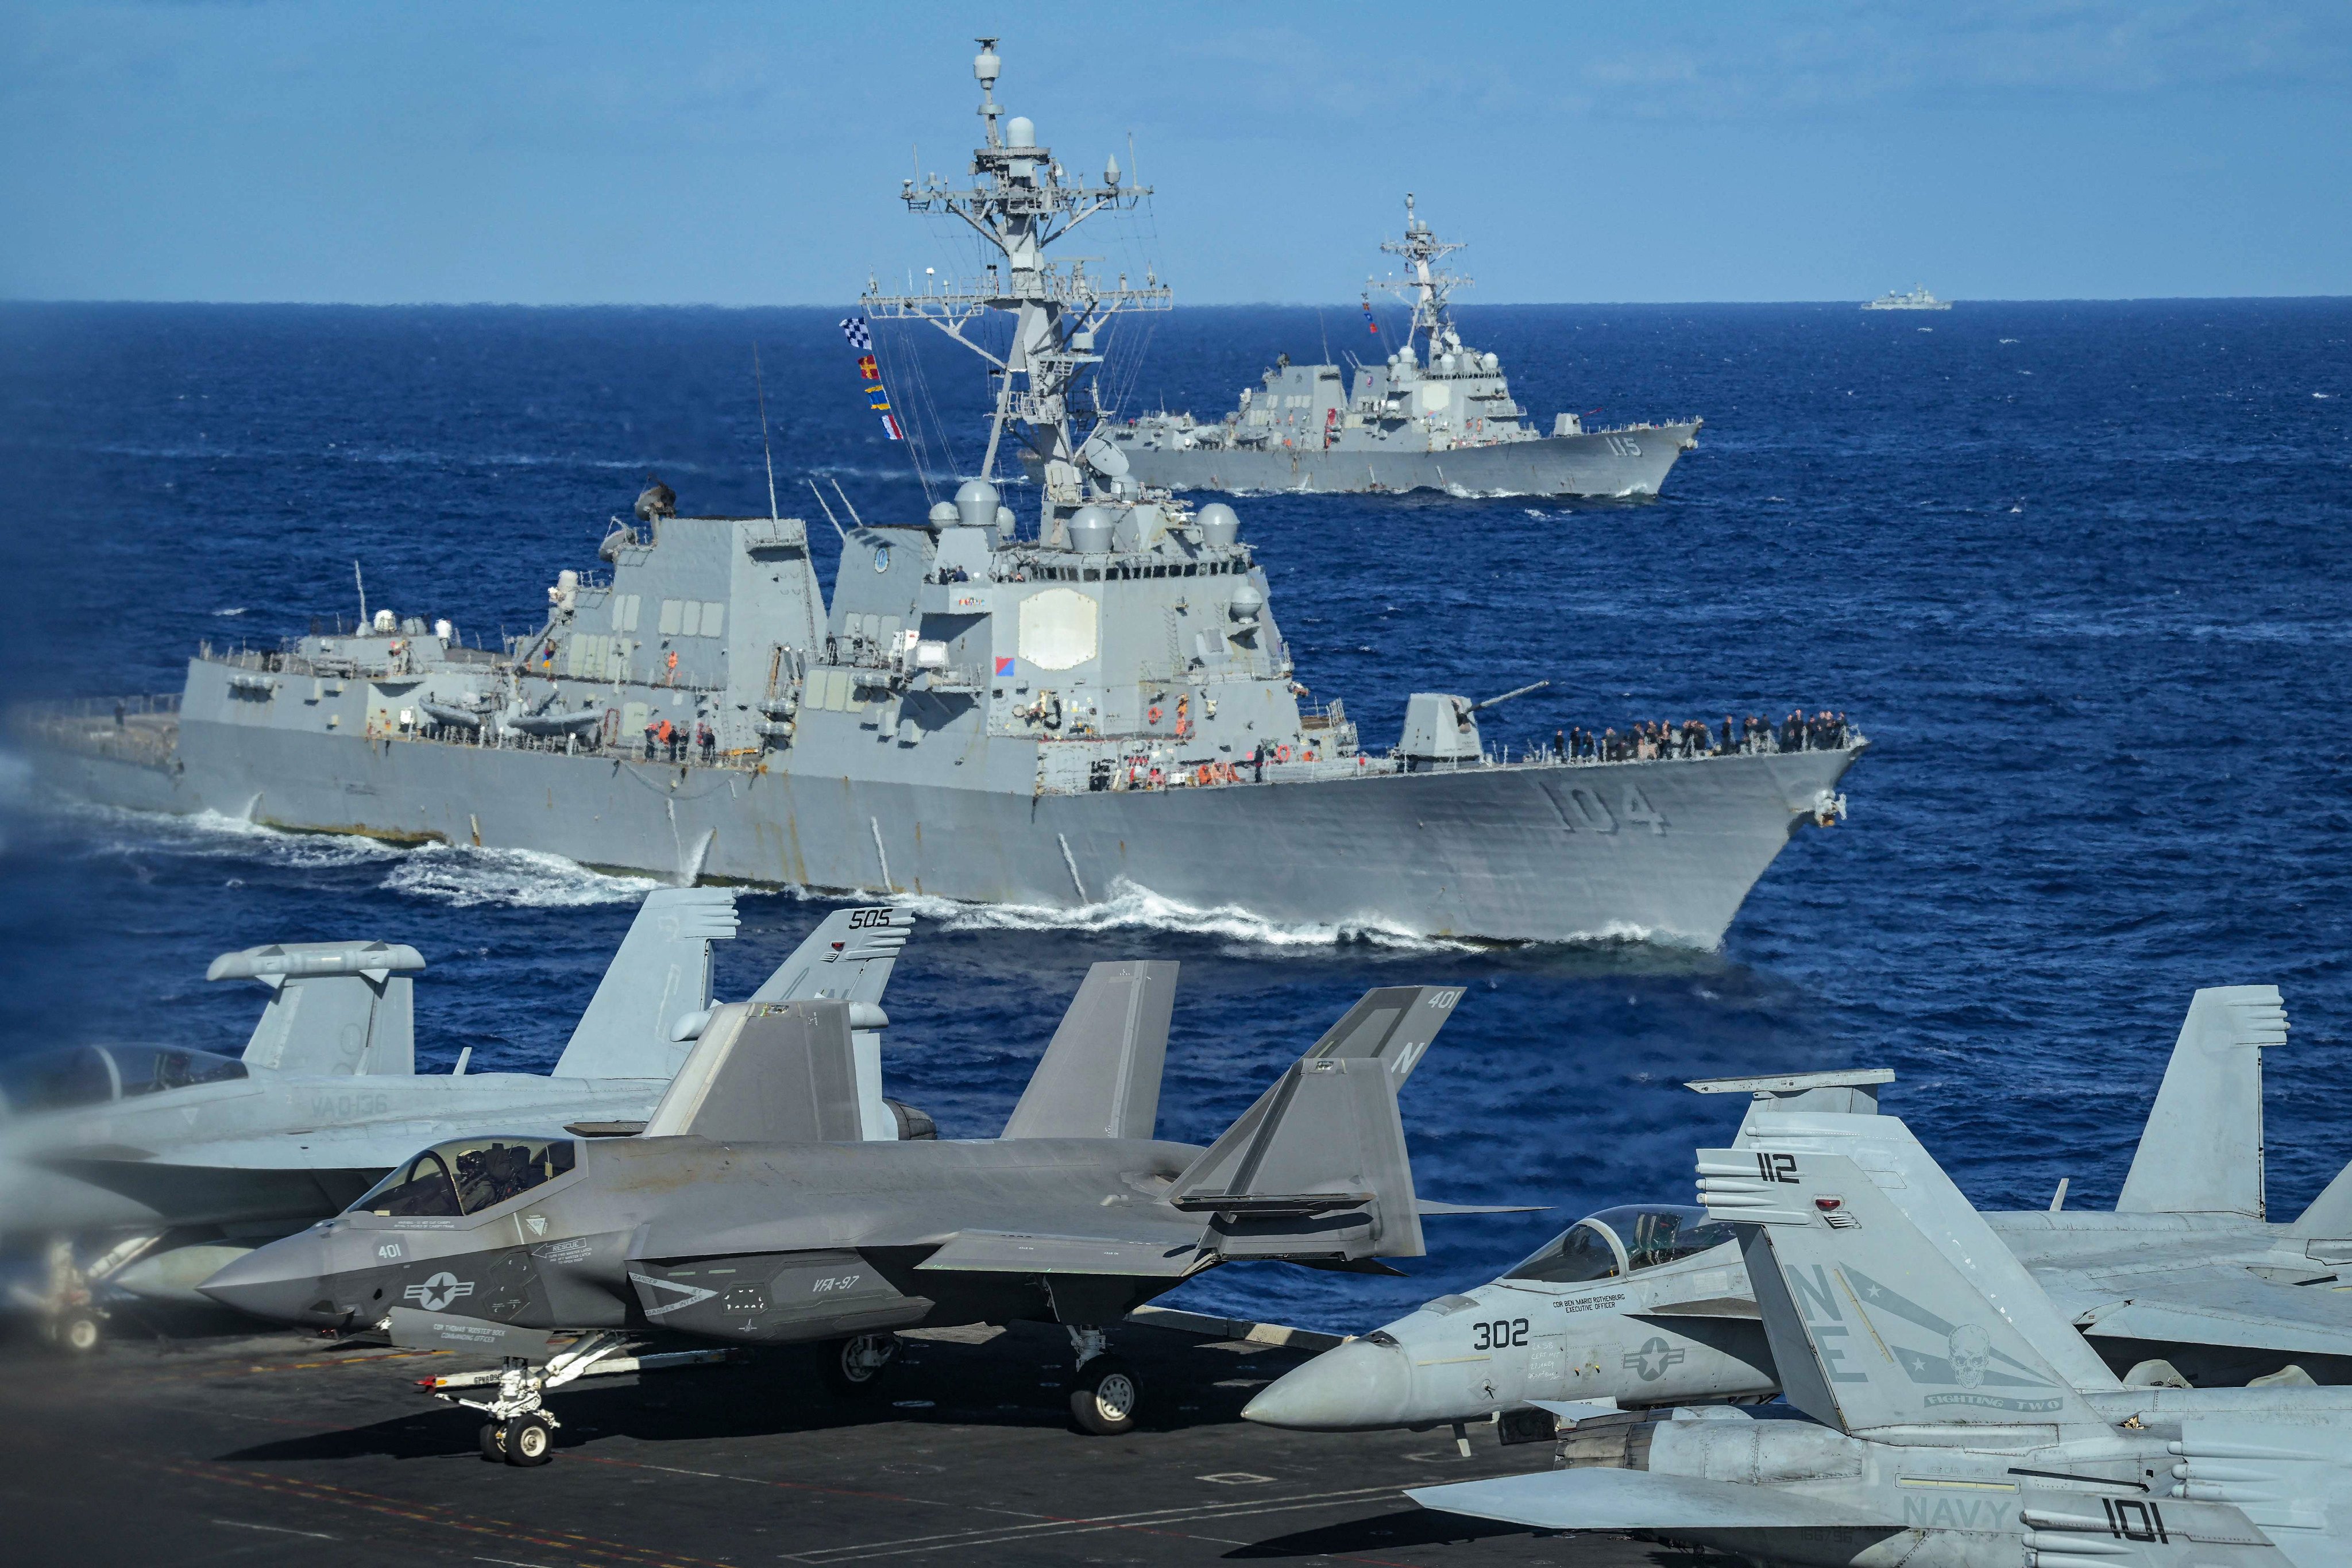 American warships take part in a three-day maritime exercise between the US and Japan in the Philippine Sea on January 31. Tokyo’s growing security alliance with Washington has strained its ties with Beijing in recent years. Photo: AFP